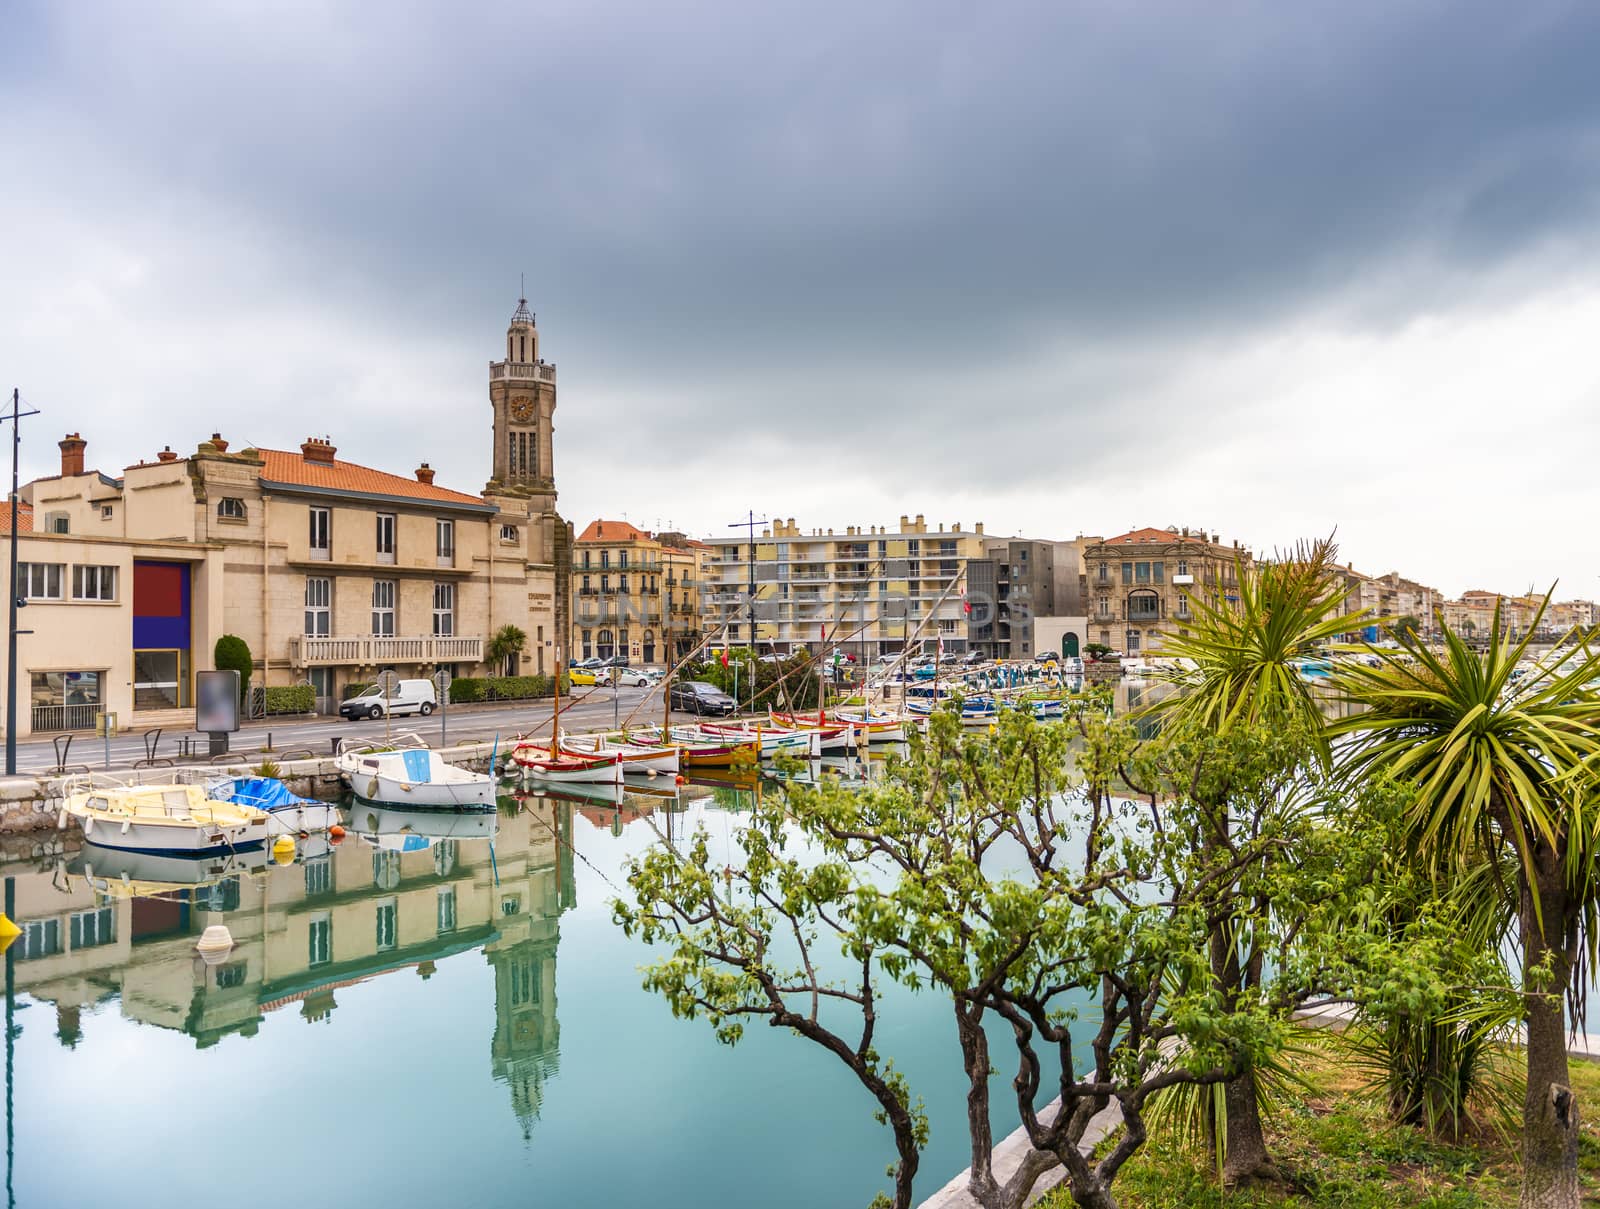 Reflections of the old chamber of commerce, on the royal canal in Sète under a very overcast sky. by Frederic